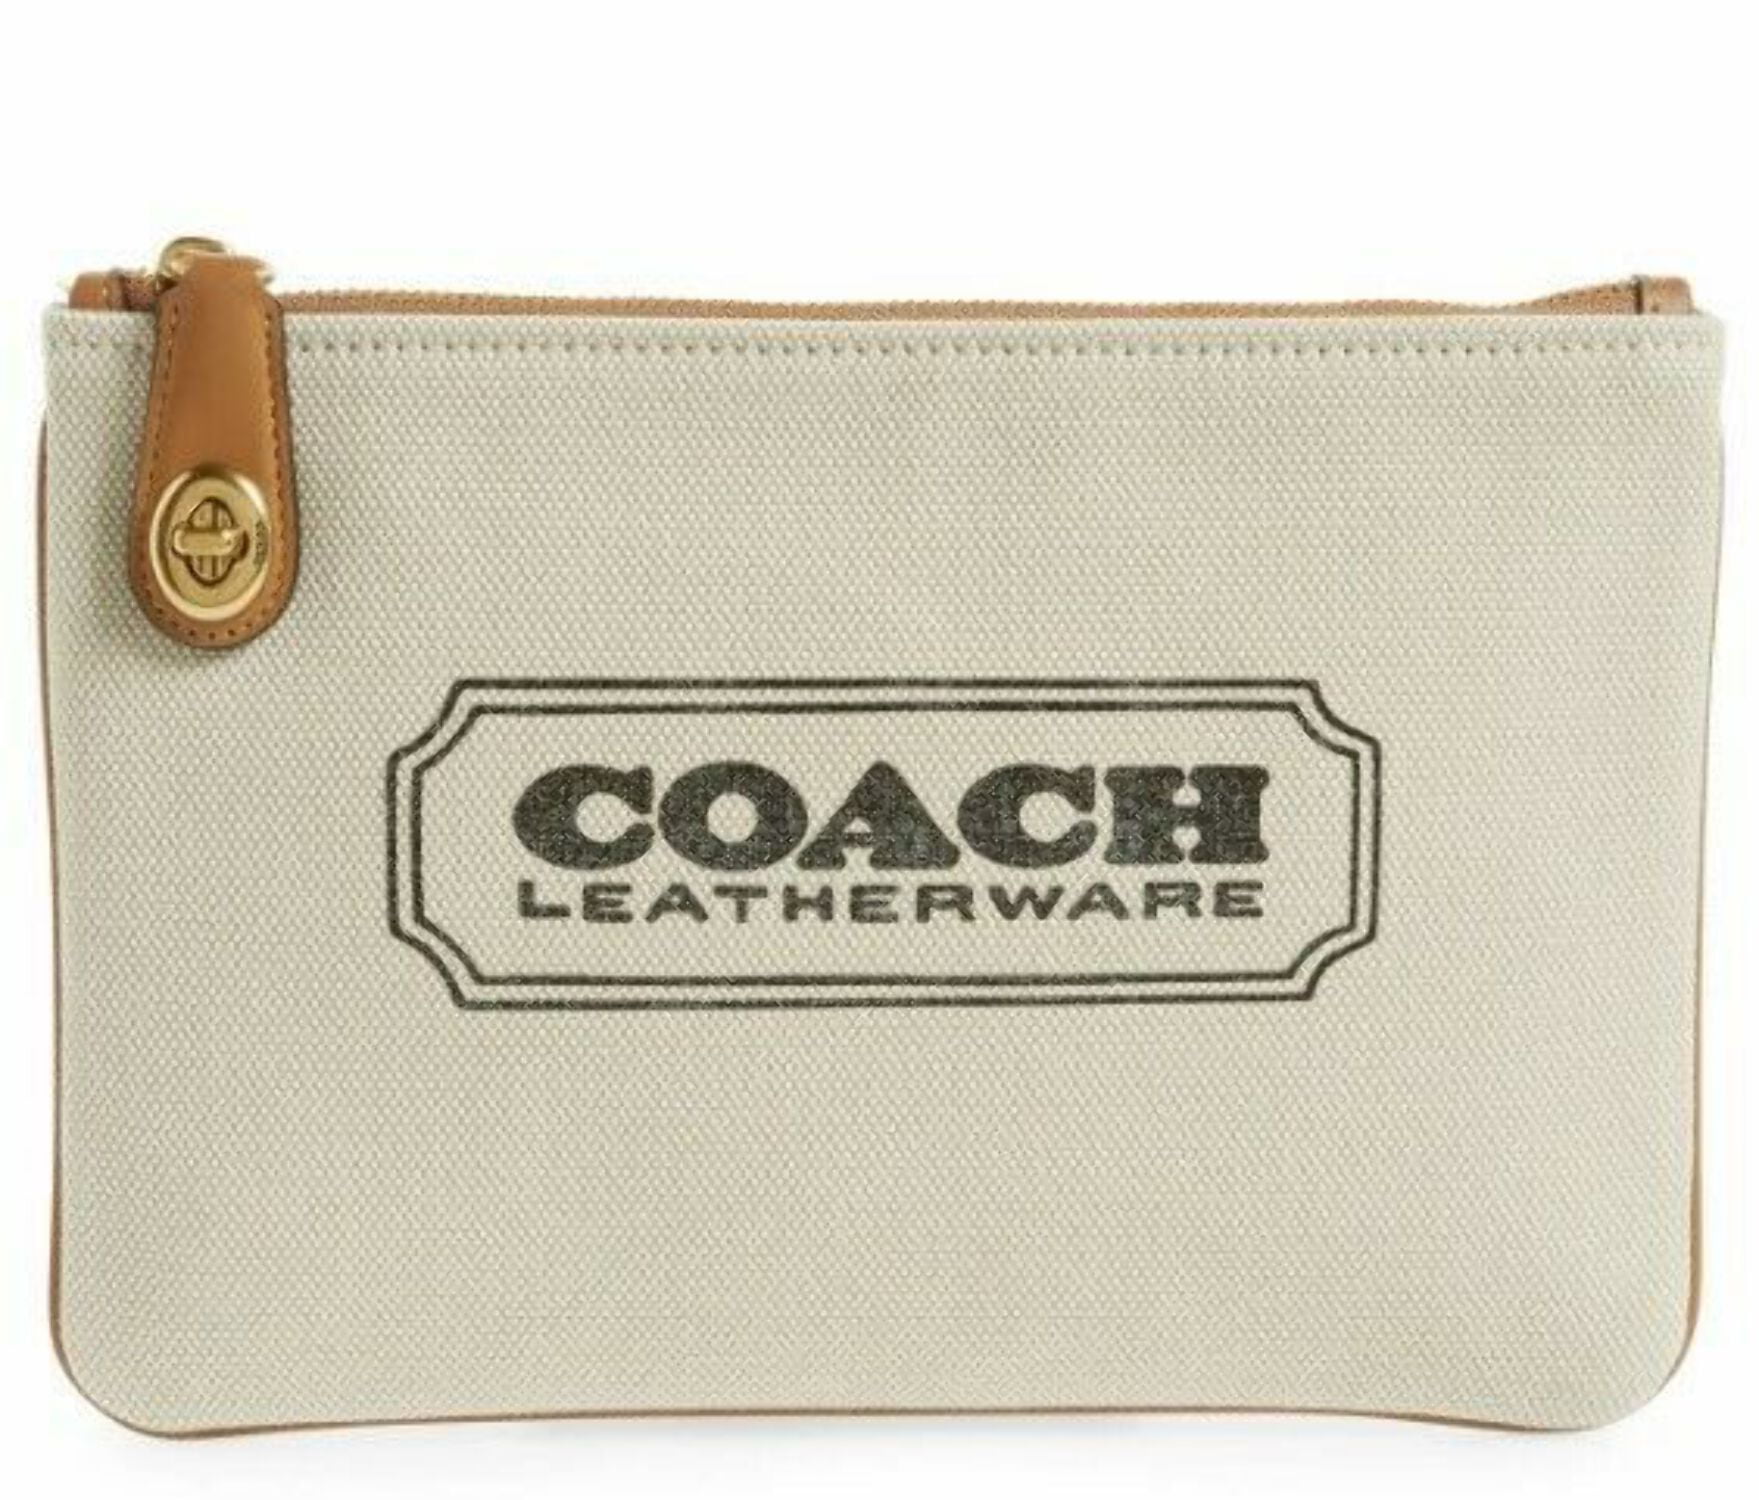 COACH Turnlock Pouch (Canvas Light Saddle) Brown Leather Accents